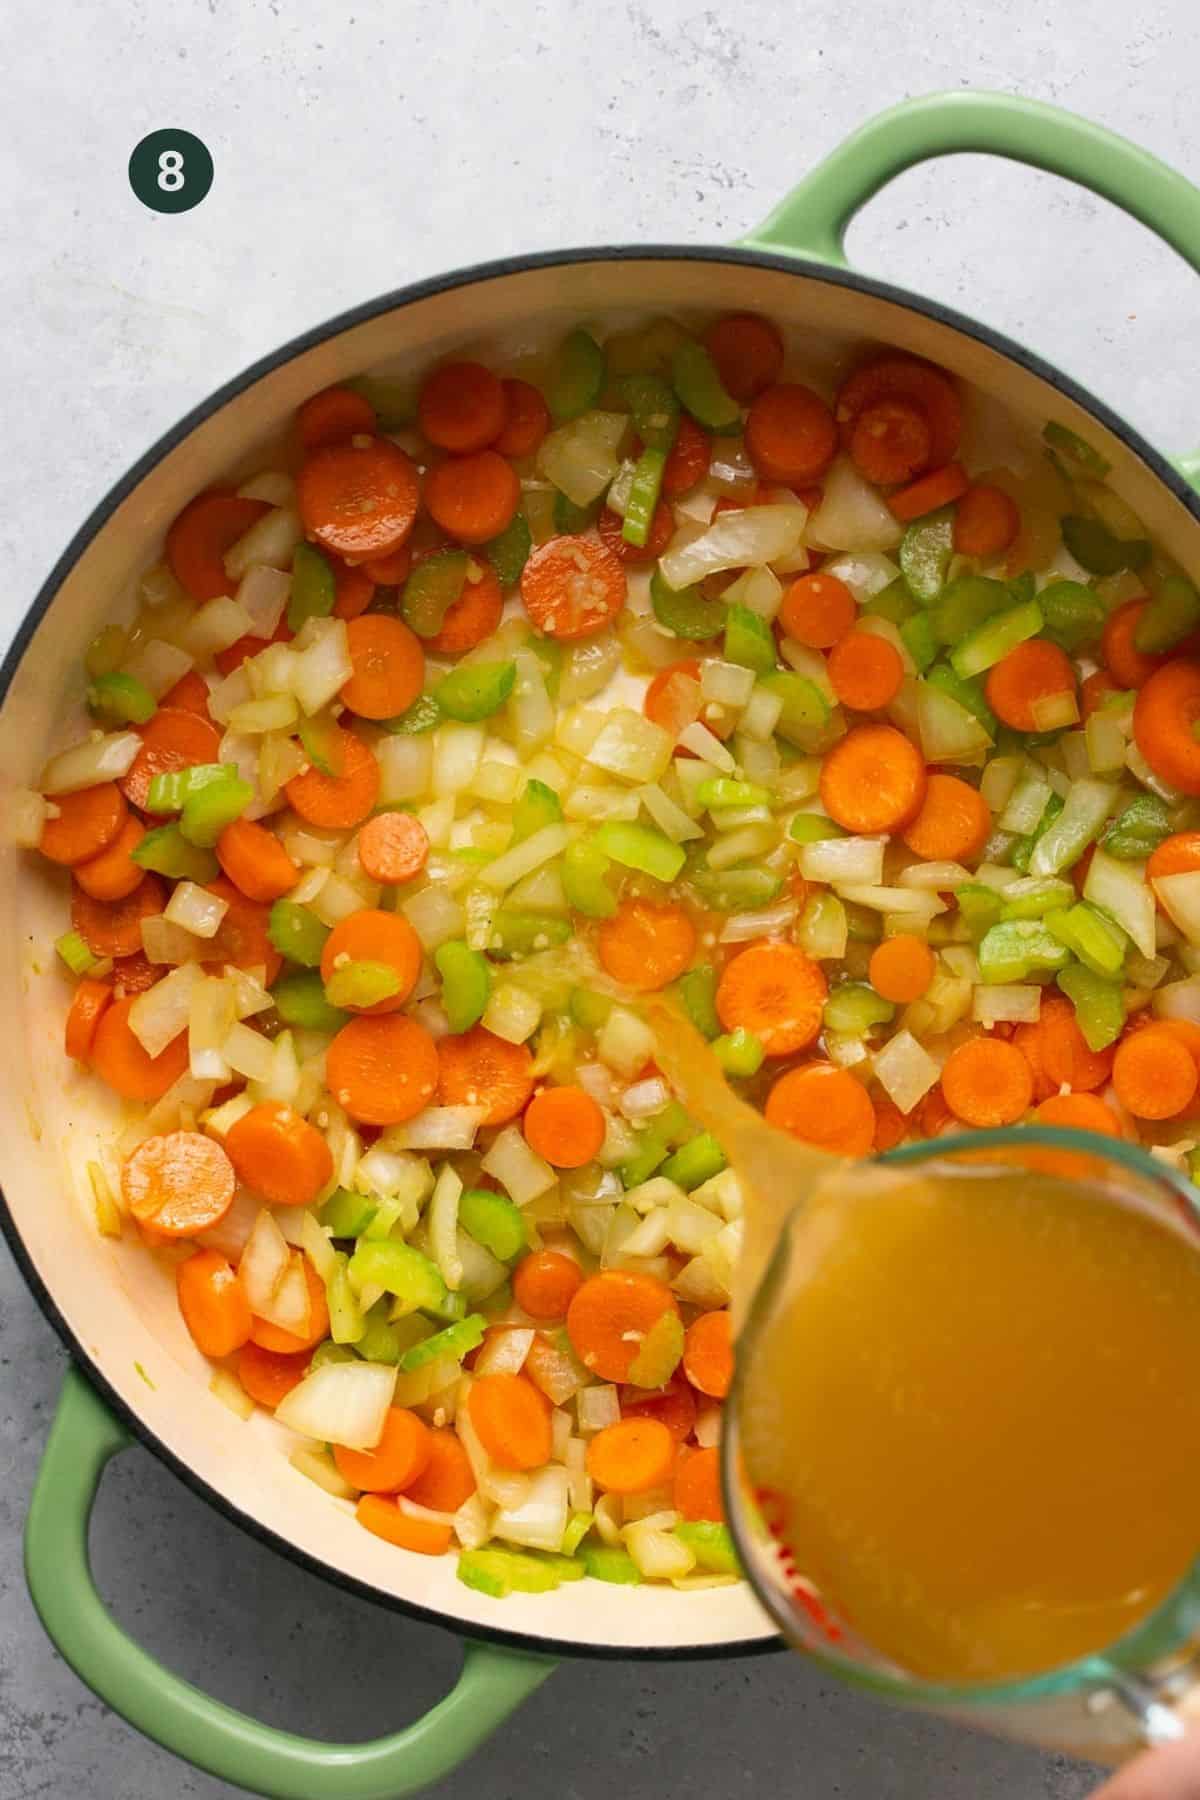 Beef broth being added to a pot of vegetables.